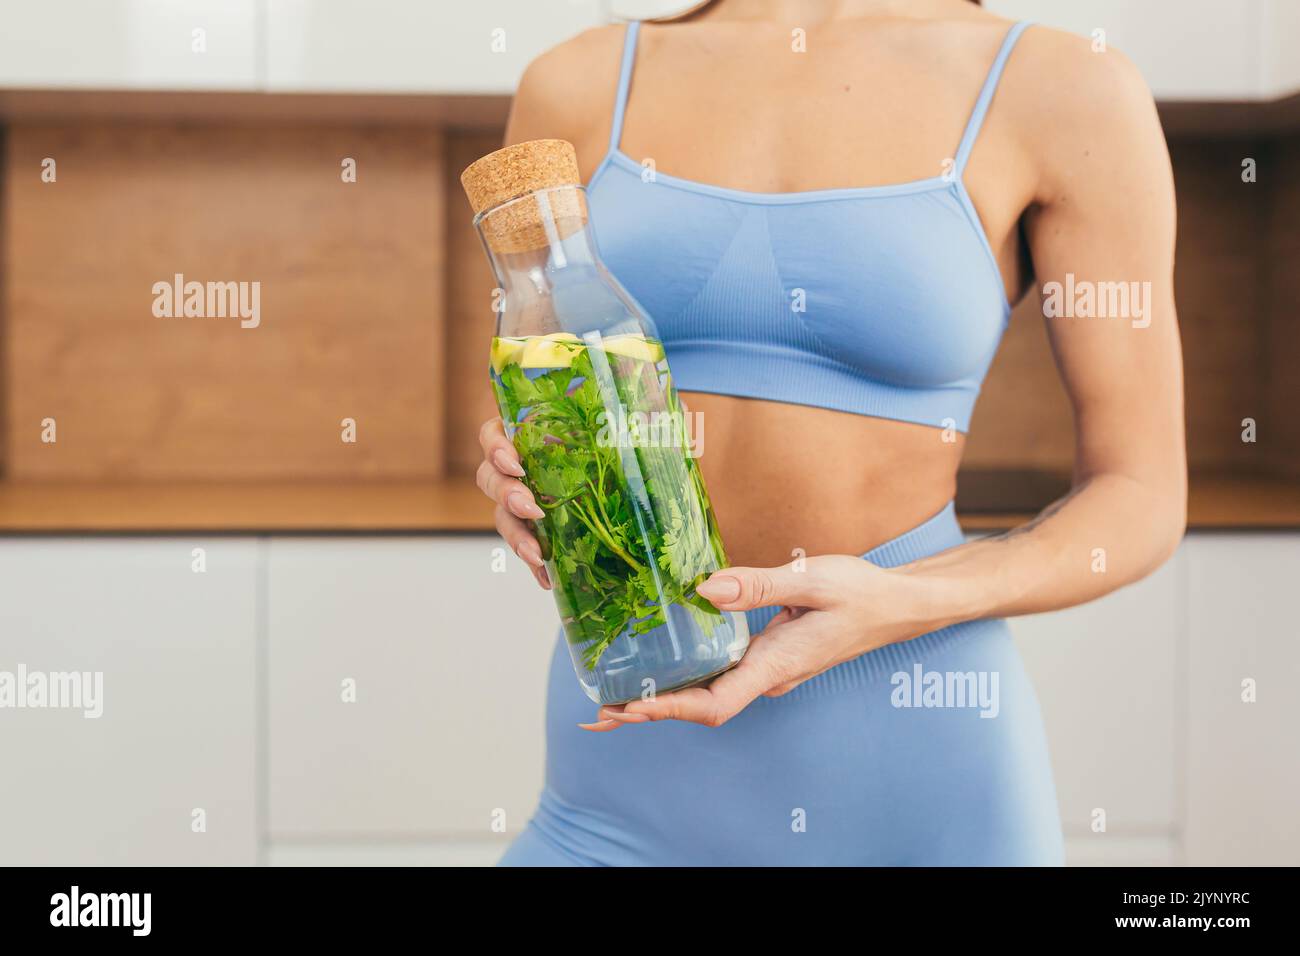 Close up photo part of body of young fitness woman holding and showing bottle of fresh juice, detox at home Stock Photo